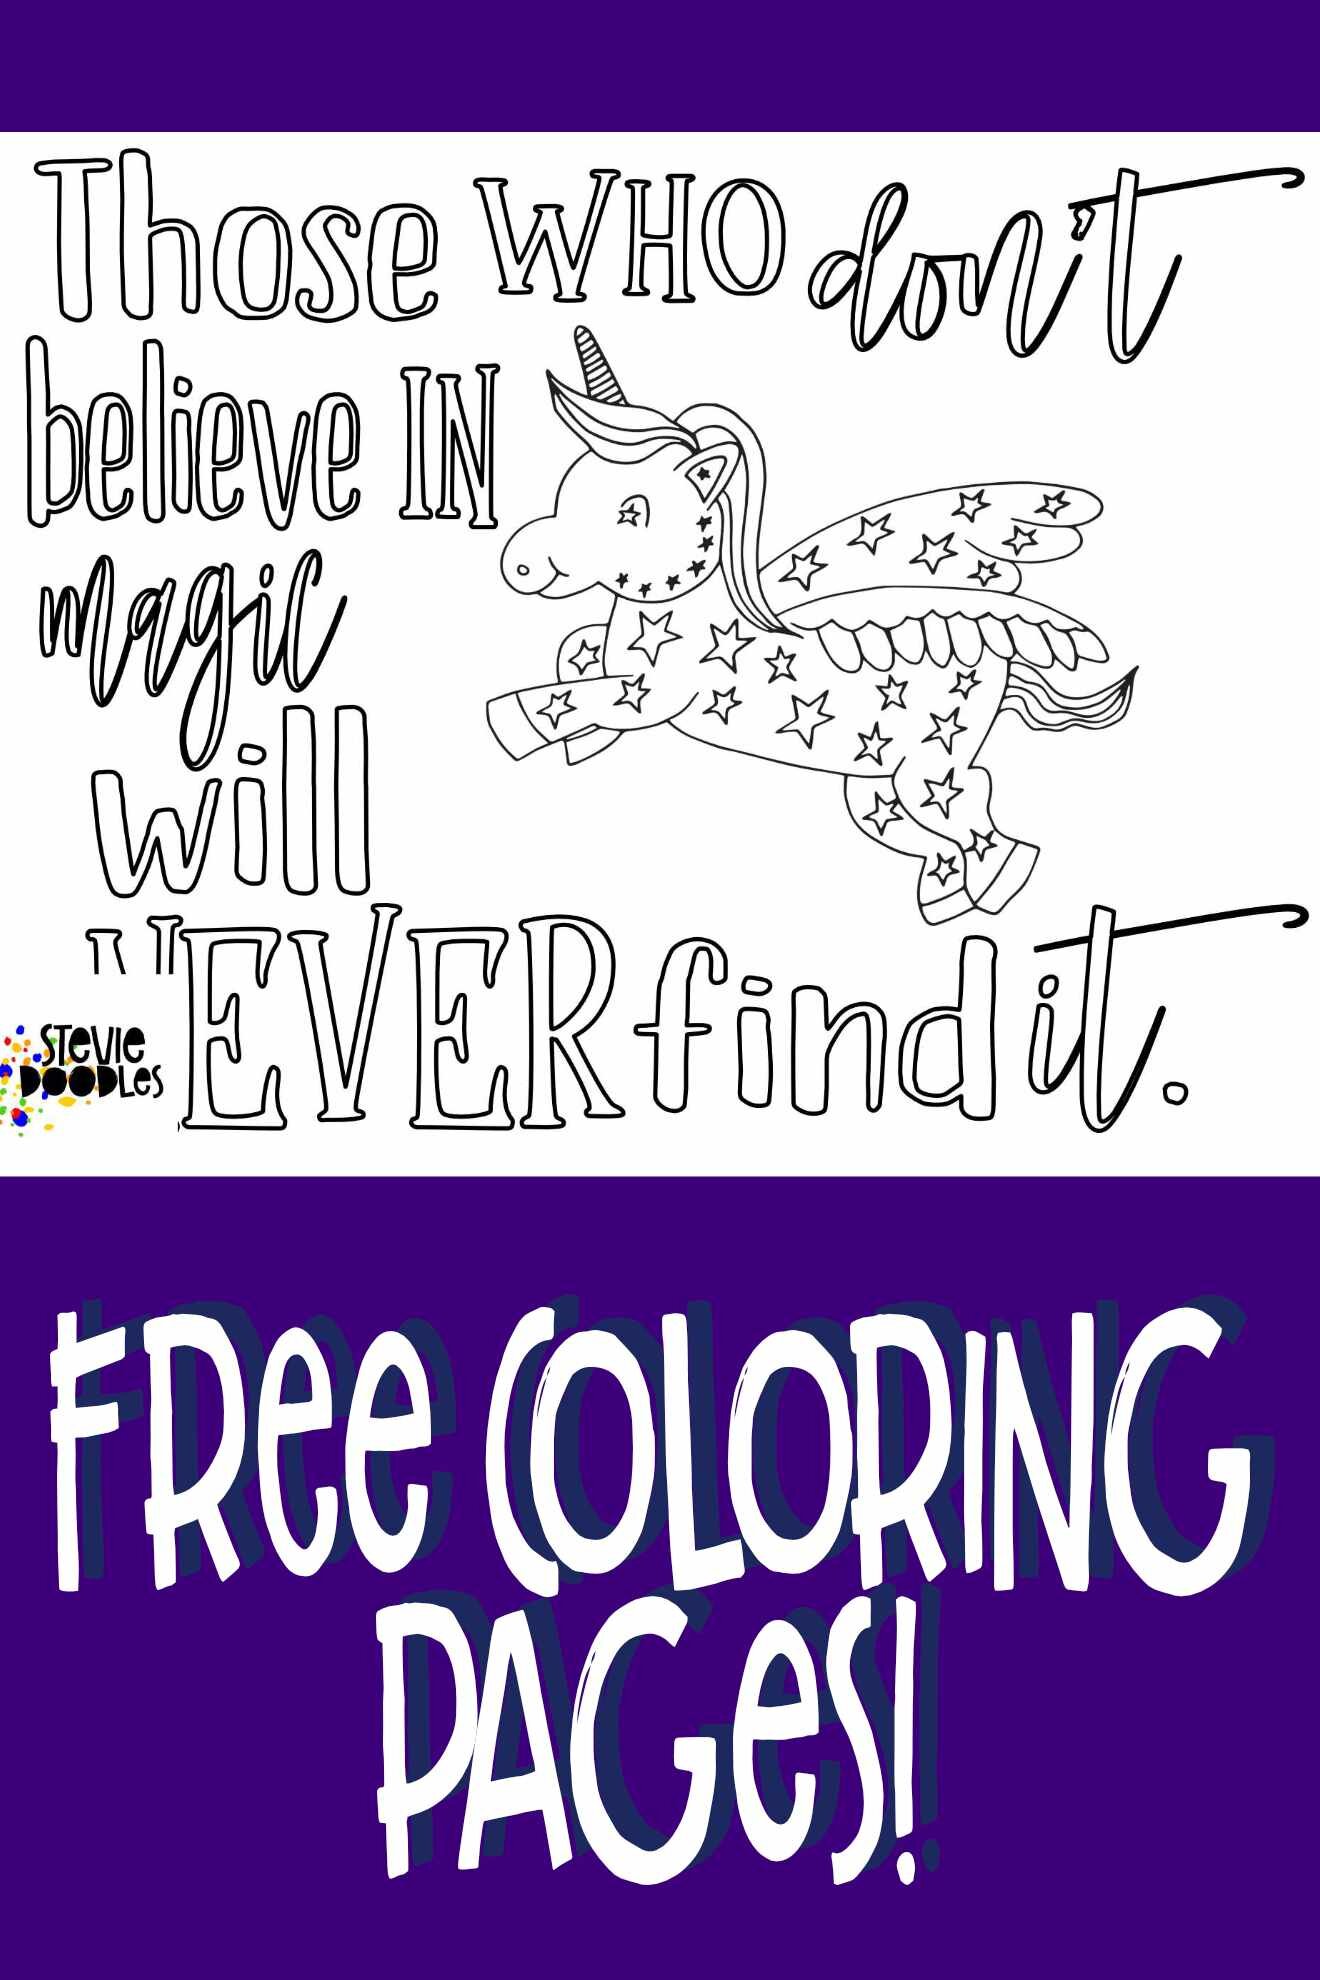 Print and color this free “Those who don’t believe in magic will never find it” unicorn coloring page - free at Stevie Doodles